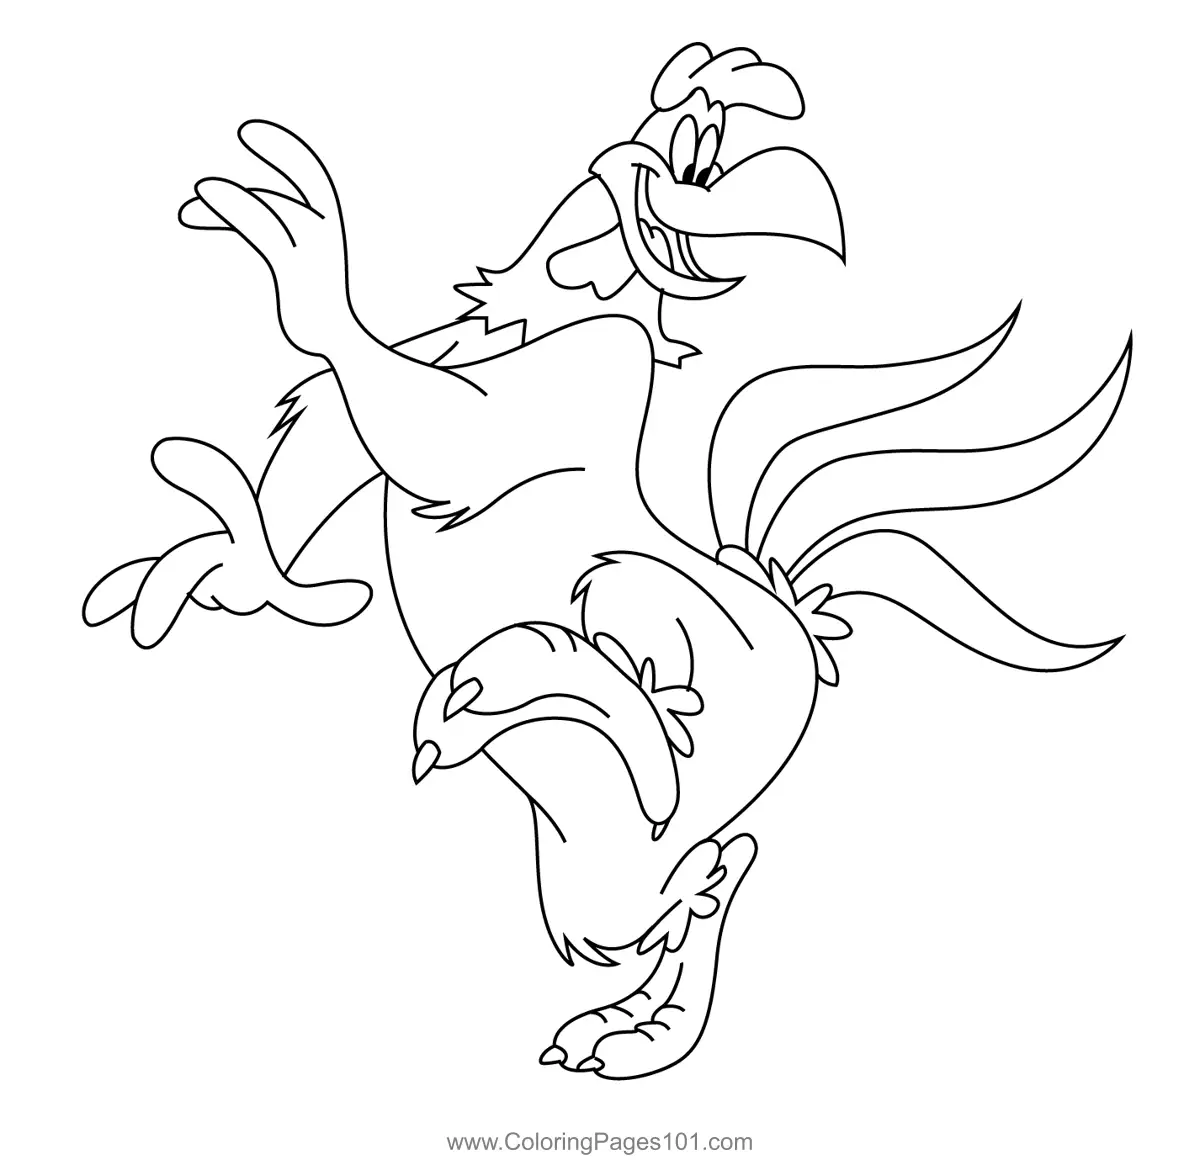 Foghorn Leghorn Coloring Page for Kids - Free Looney Tunes Printable ...